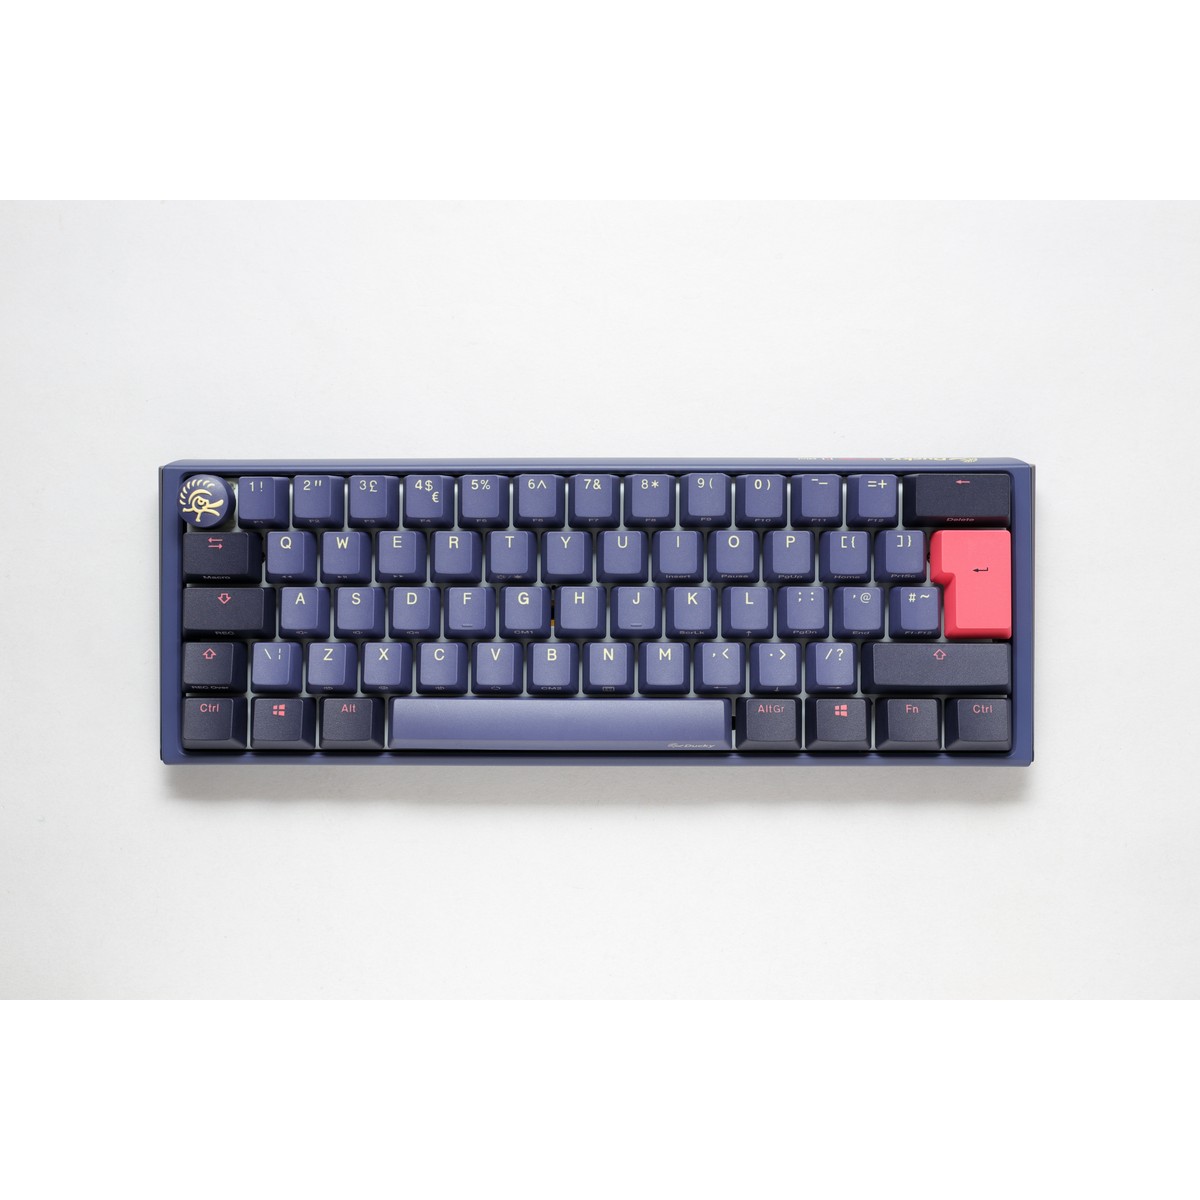 Ducky - Ducky One 3 Cosmic Mini 60% USB RGB Mechanical Gaming Keyboard Cherry MX Silent Red Switch - UK Layout